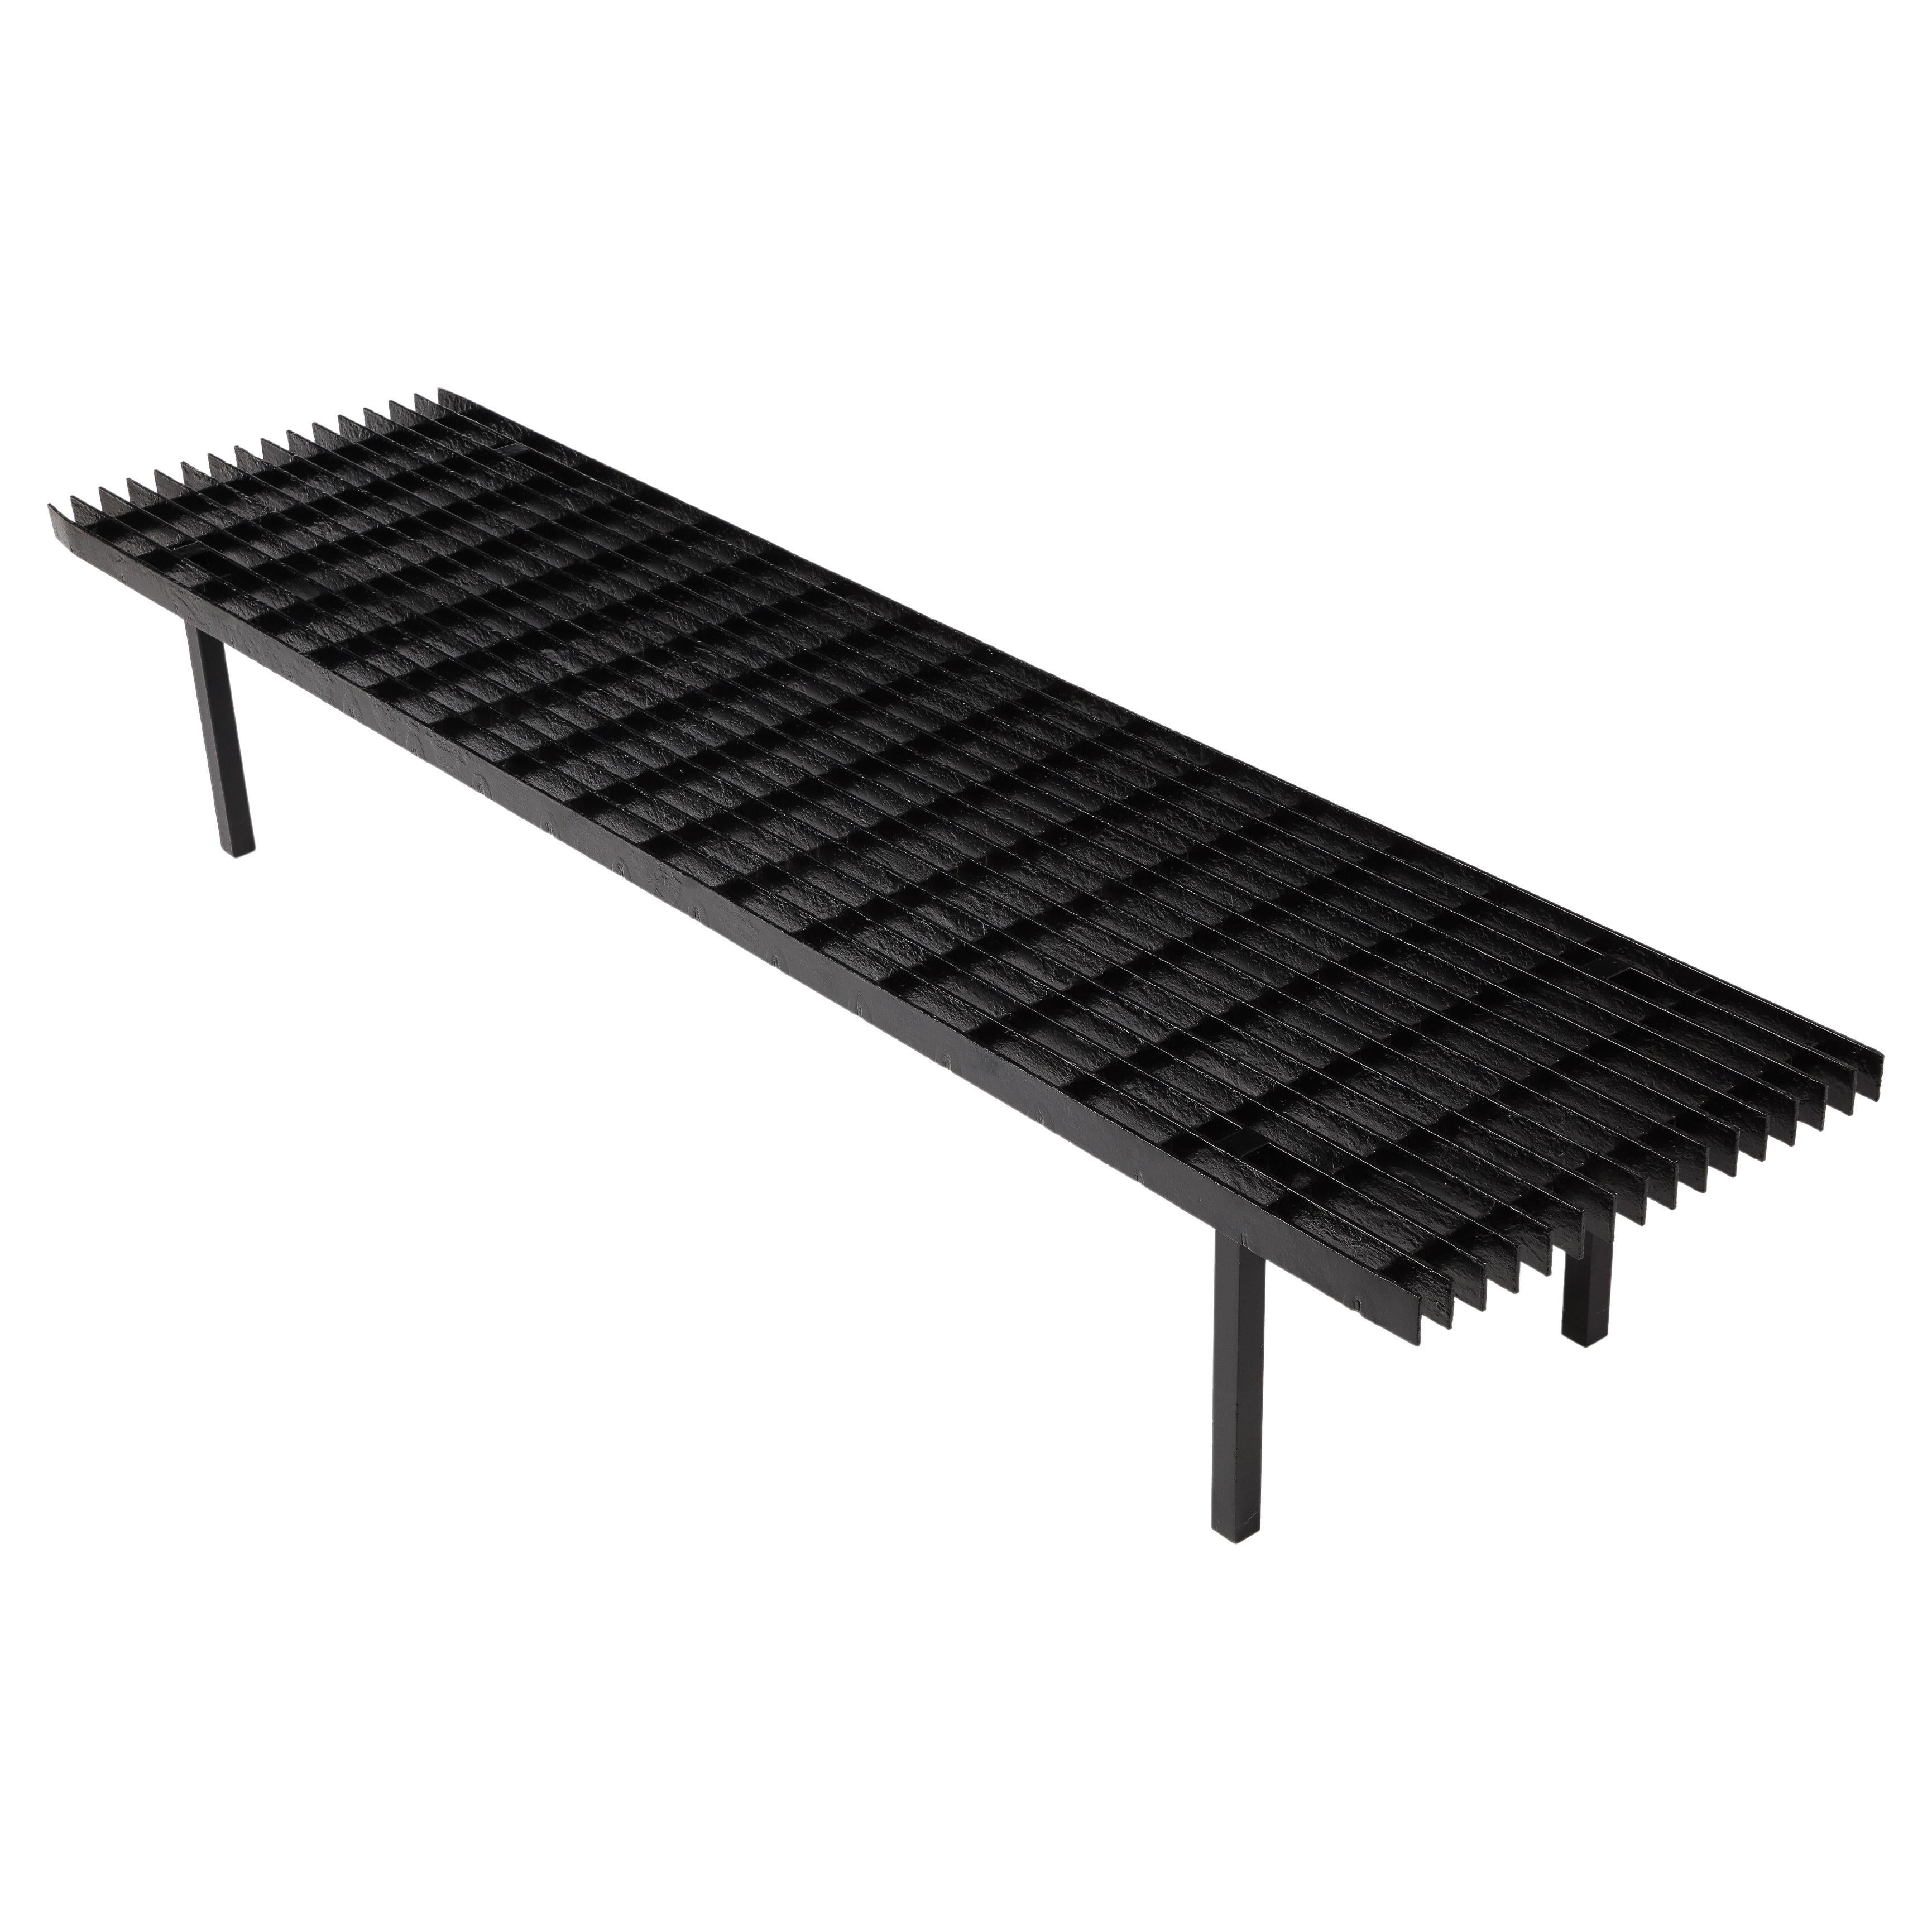 Black Enameled Steel Slat Bench or Low Coffee Table, USA 1970's For Sale